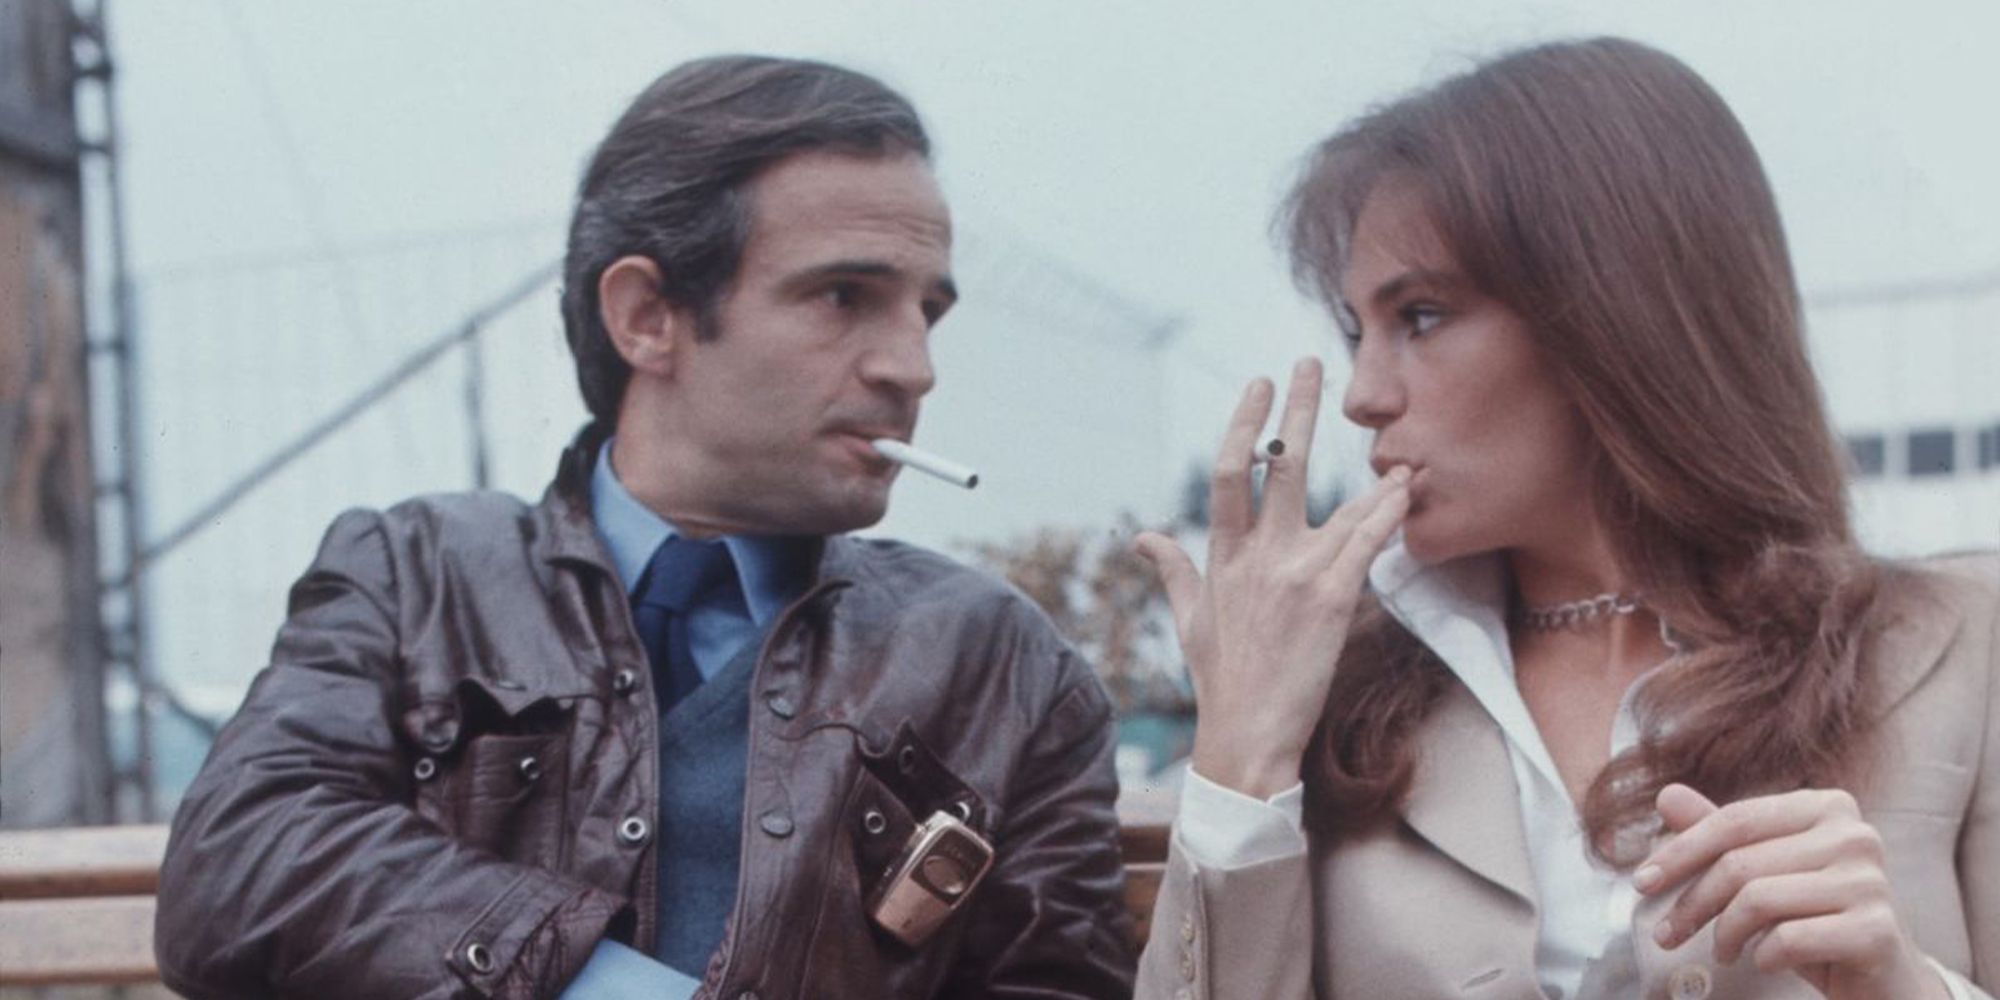 Truffaut is seen smoking with Jacqueline Bisset in a screengrab from Truffaut's Day for Night.